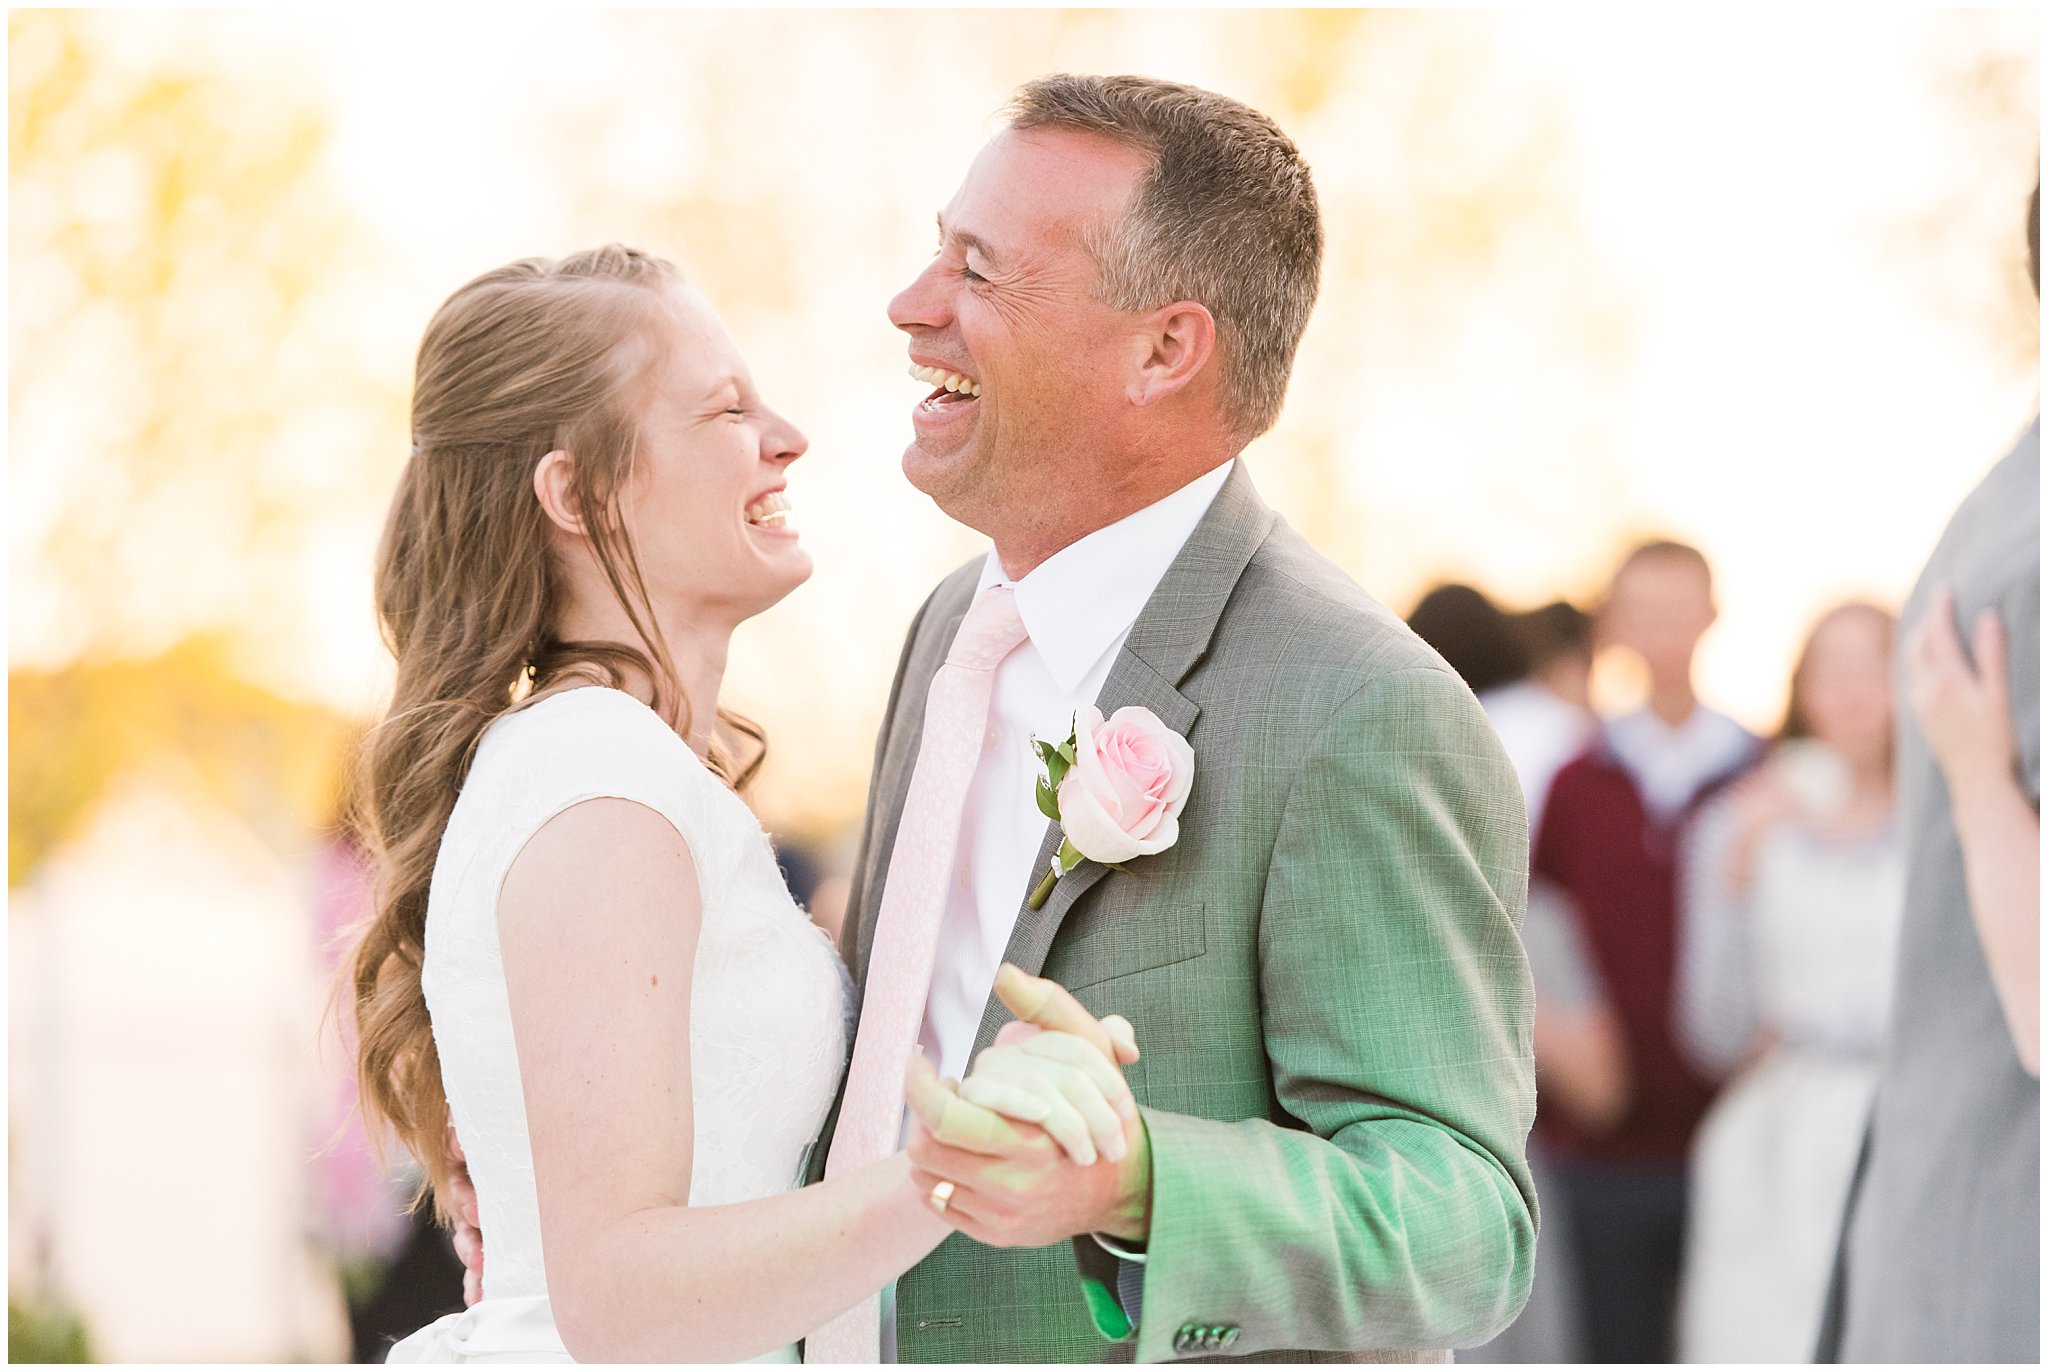 Father daughter dance, joyful and filled with laughter | Backyard outdoor spring wedding with grey, blush, and light blue wedding colors | Spring Provo City Center Temple Wedding | Utah Wedding Photographers | Jessie and Dallin Photography